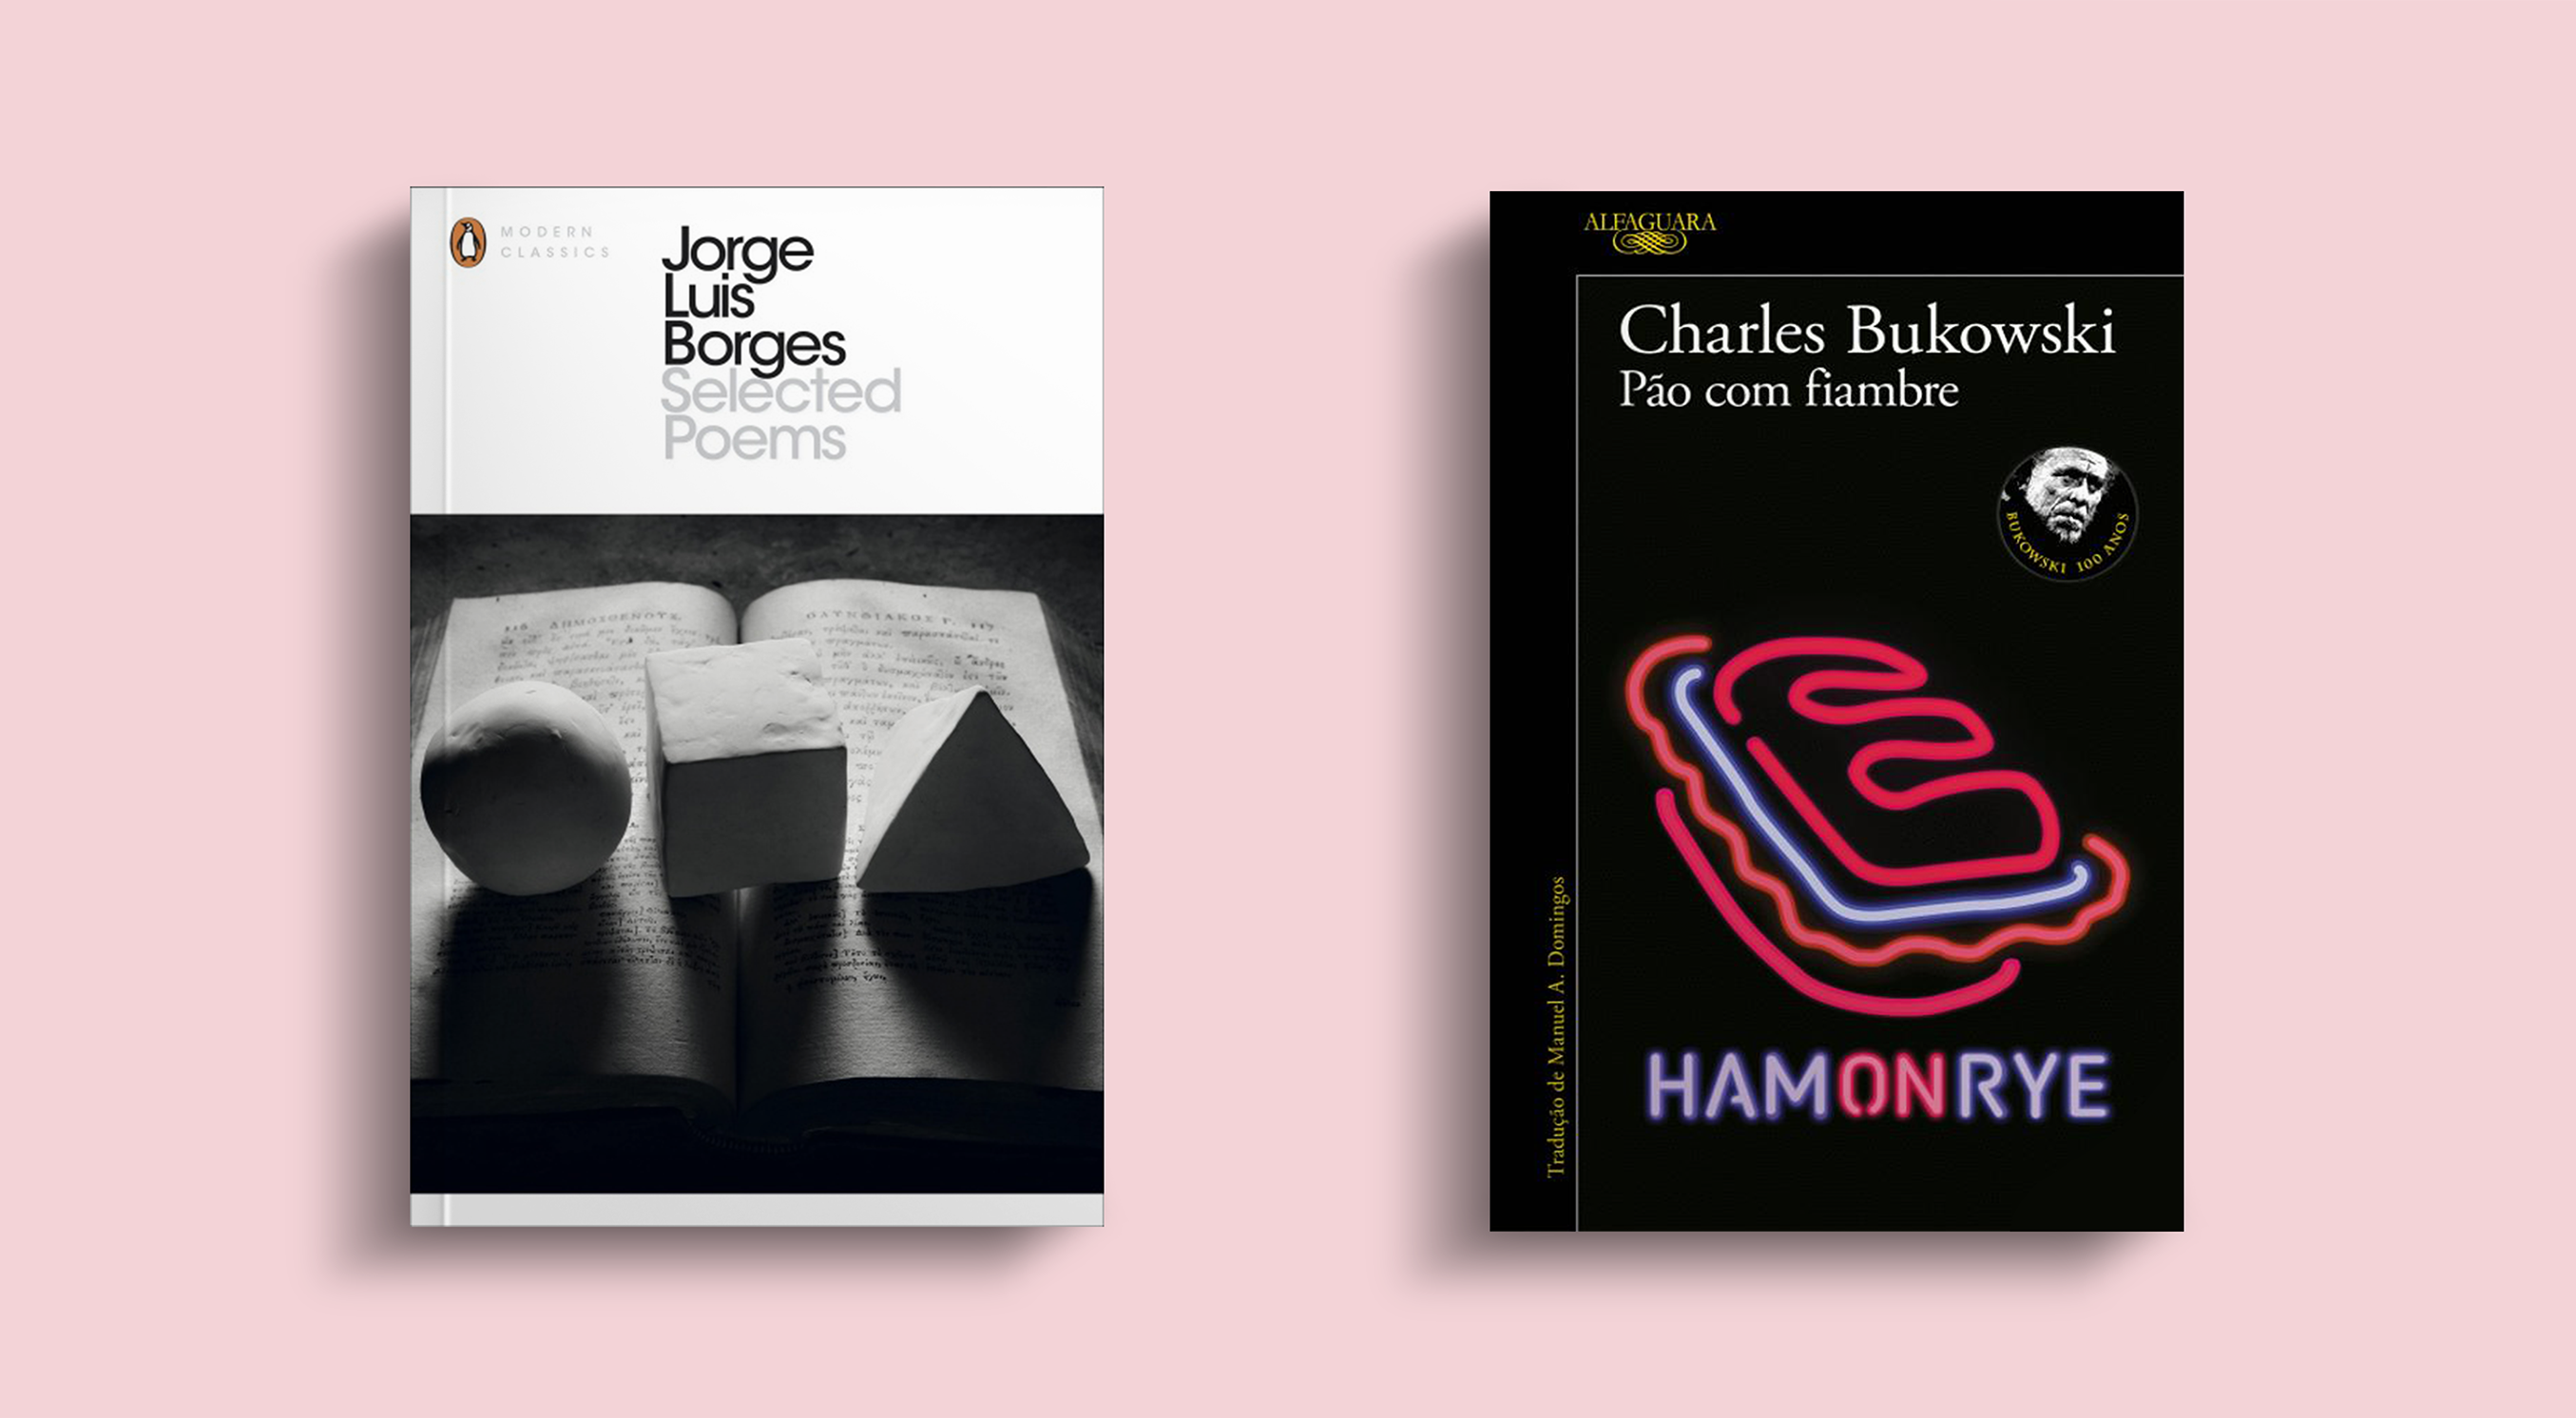 Livraria Lello suggests… "Selected Poems", by Jorge Luís Borges, and "Pão com Fiambre", by Charles Bukowski